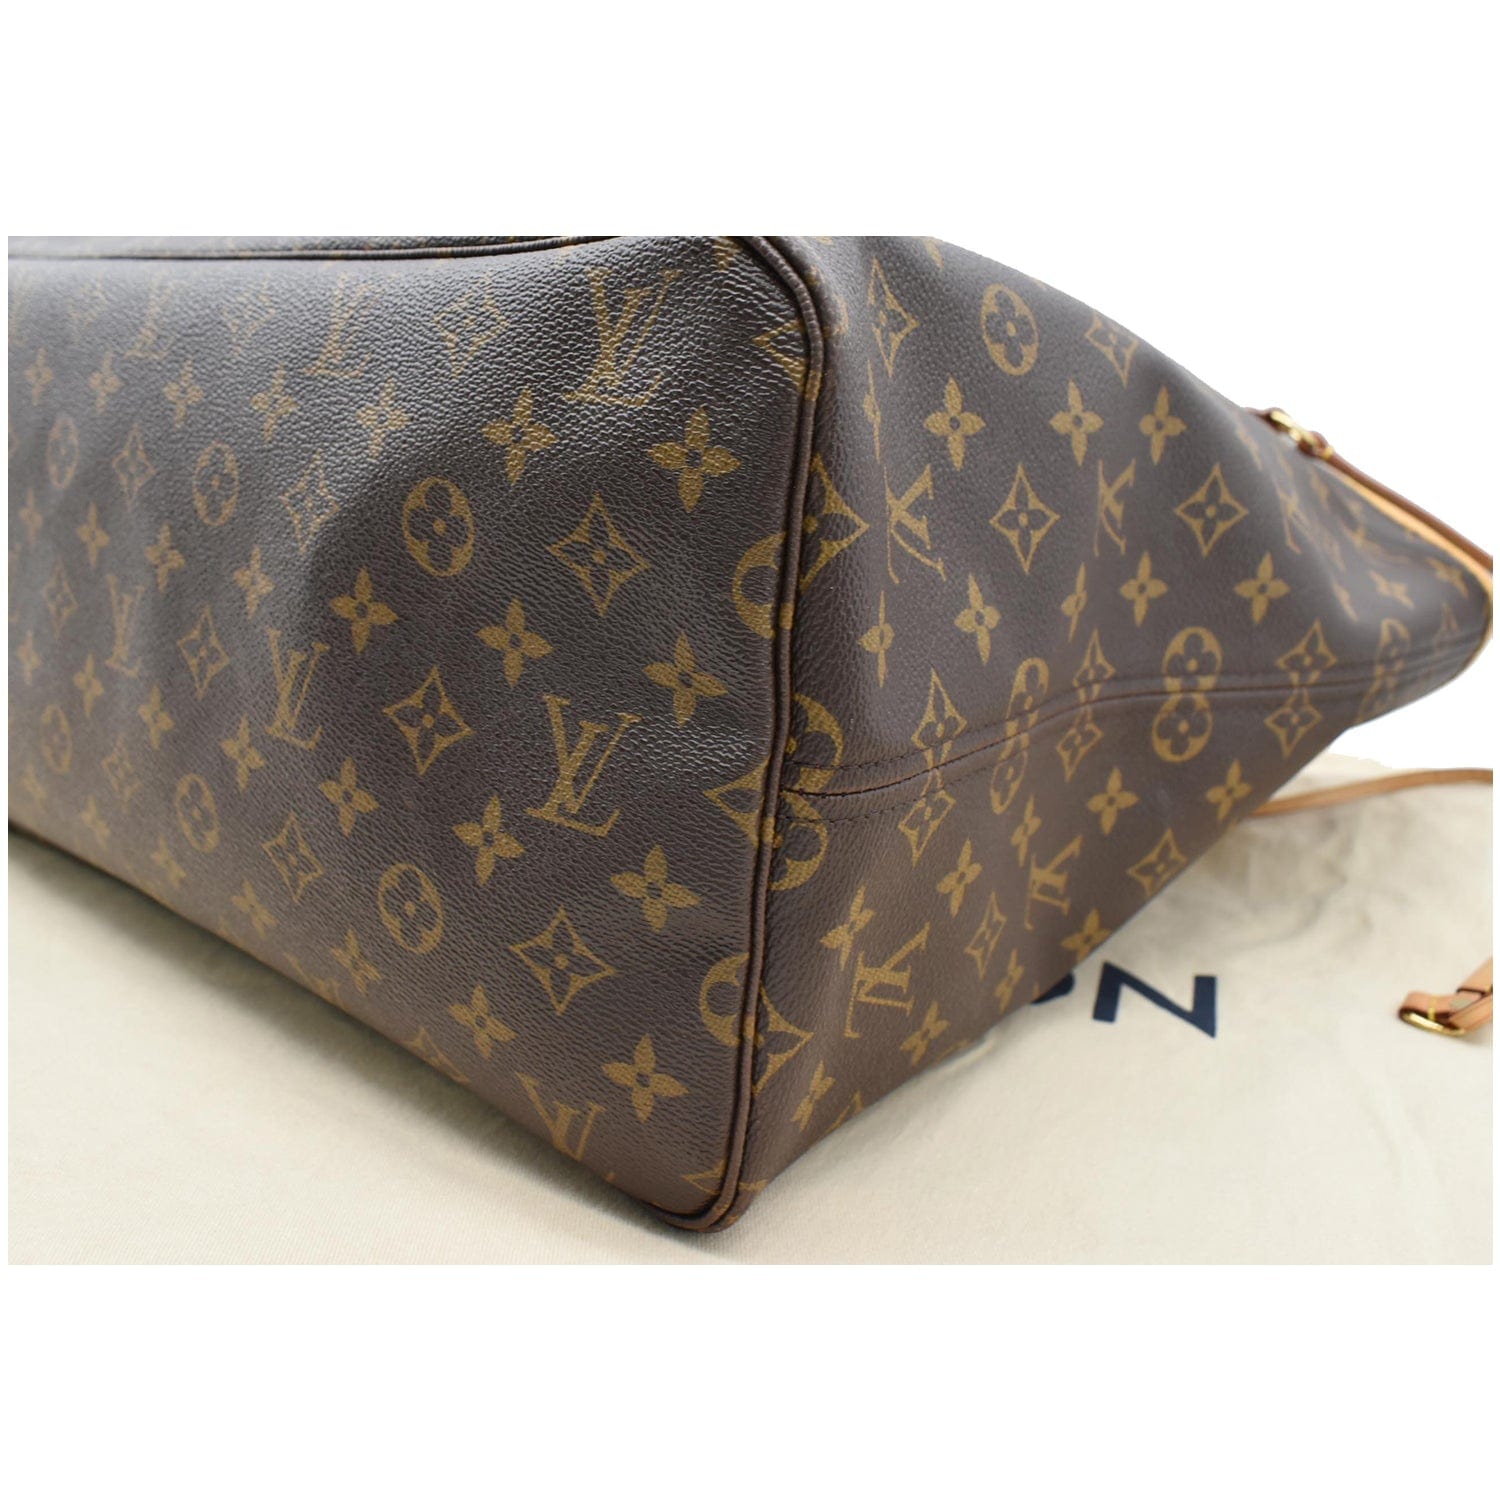 LOUIS VUITTON Neverfull GM Monogram Canvas Tote Bag Brown - 10% Off